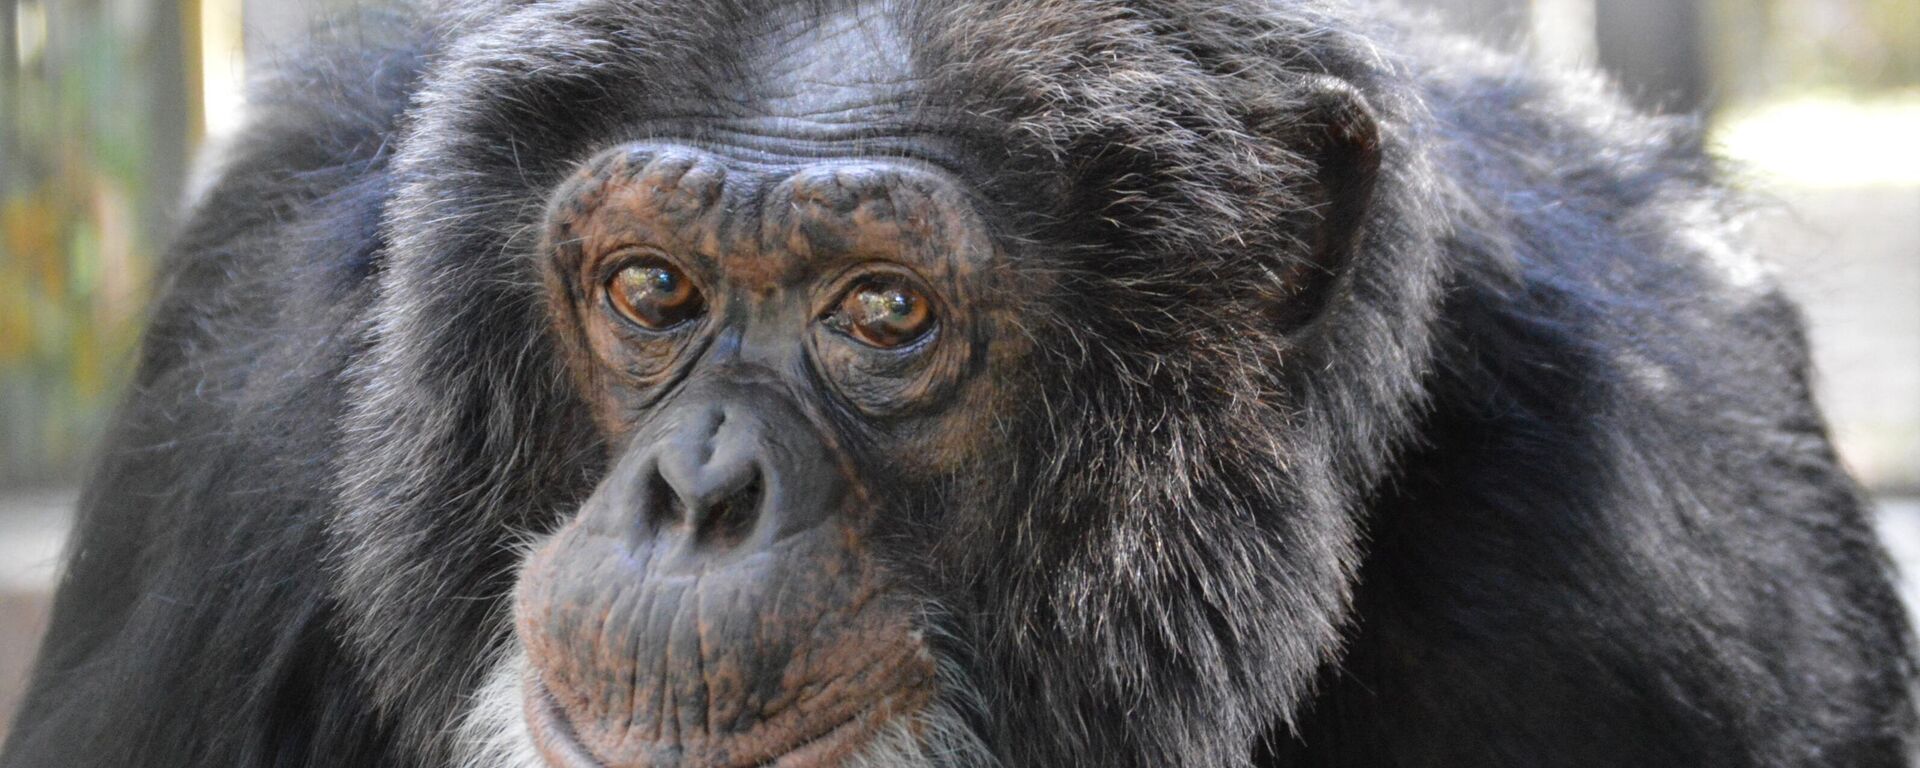 This 2016 image courtesy of the Center for Great Apes (CGA) in Wauchula, Florida, shows 37-year-old Bubbles, who once was the favorite pet chimpanzee for the world-famous pop singer Michael Jackson, in his habitat at CGA. - One of them worked alongside Clint Eastwood, others acted in the remake of sci-fi classic Planet of the Apes, while yet another was the darling favorite of Michael Jackson.
They are the 53 chimpanzees and orangutans who live in safety in a unique sanctuary in central Florida.
All of these great apes were raised by humans and lack the basic survival skills to ever live in the wild. They do not know how to gather food, and the mothers would be incapable of caring for their offspring.
For that reason, they had no other place to go when Hollywood or scientific research labs had no more use for them, or when they grew too big and powerful for their celebrity owners to continue caring for them. The lucky ones make the final journey to this oasis, officially known as the Center for Great Apes (CGA) in Florida, in the southeastern US.  - Sputnik International, 1920, 30.04.2022